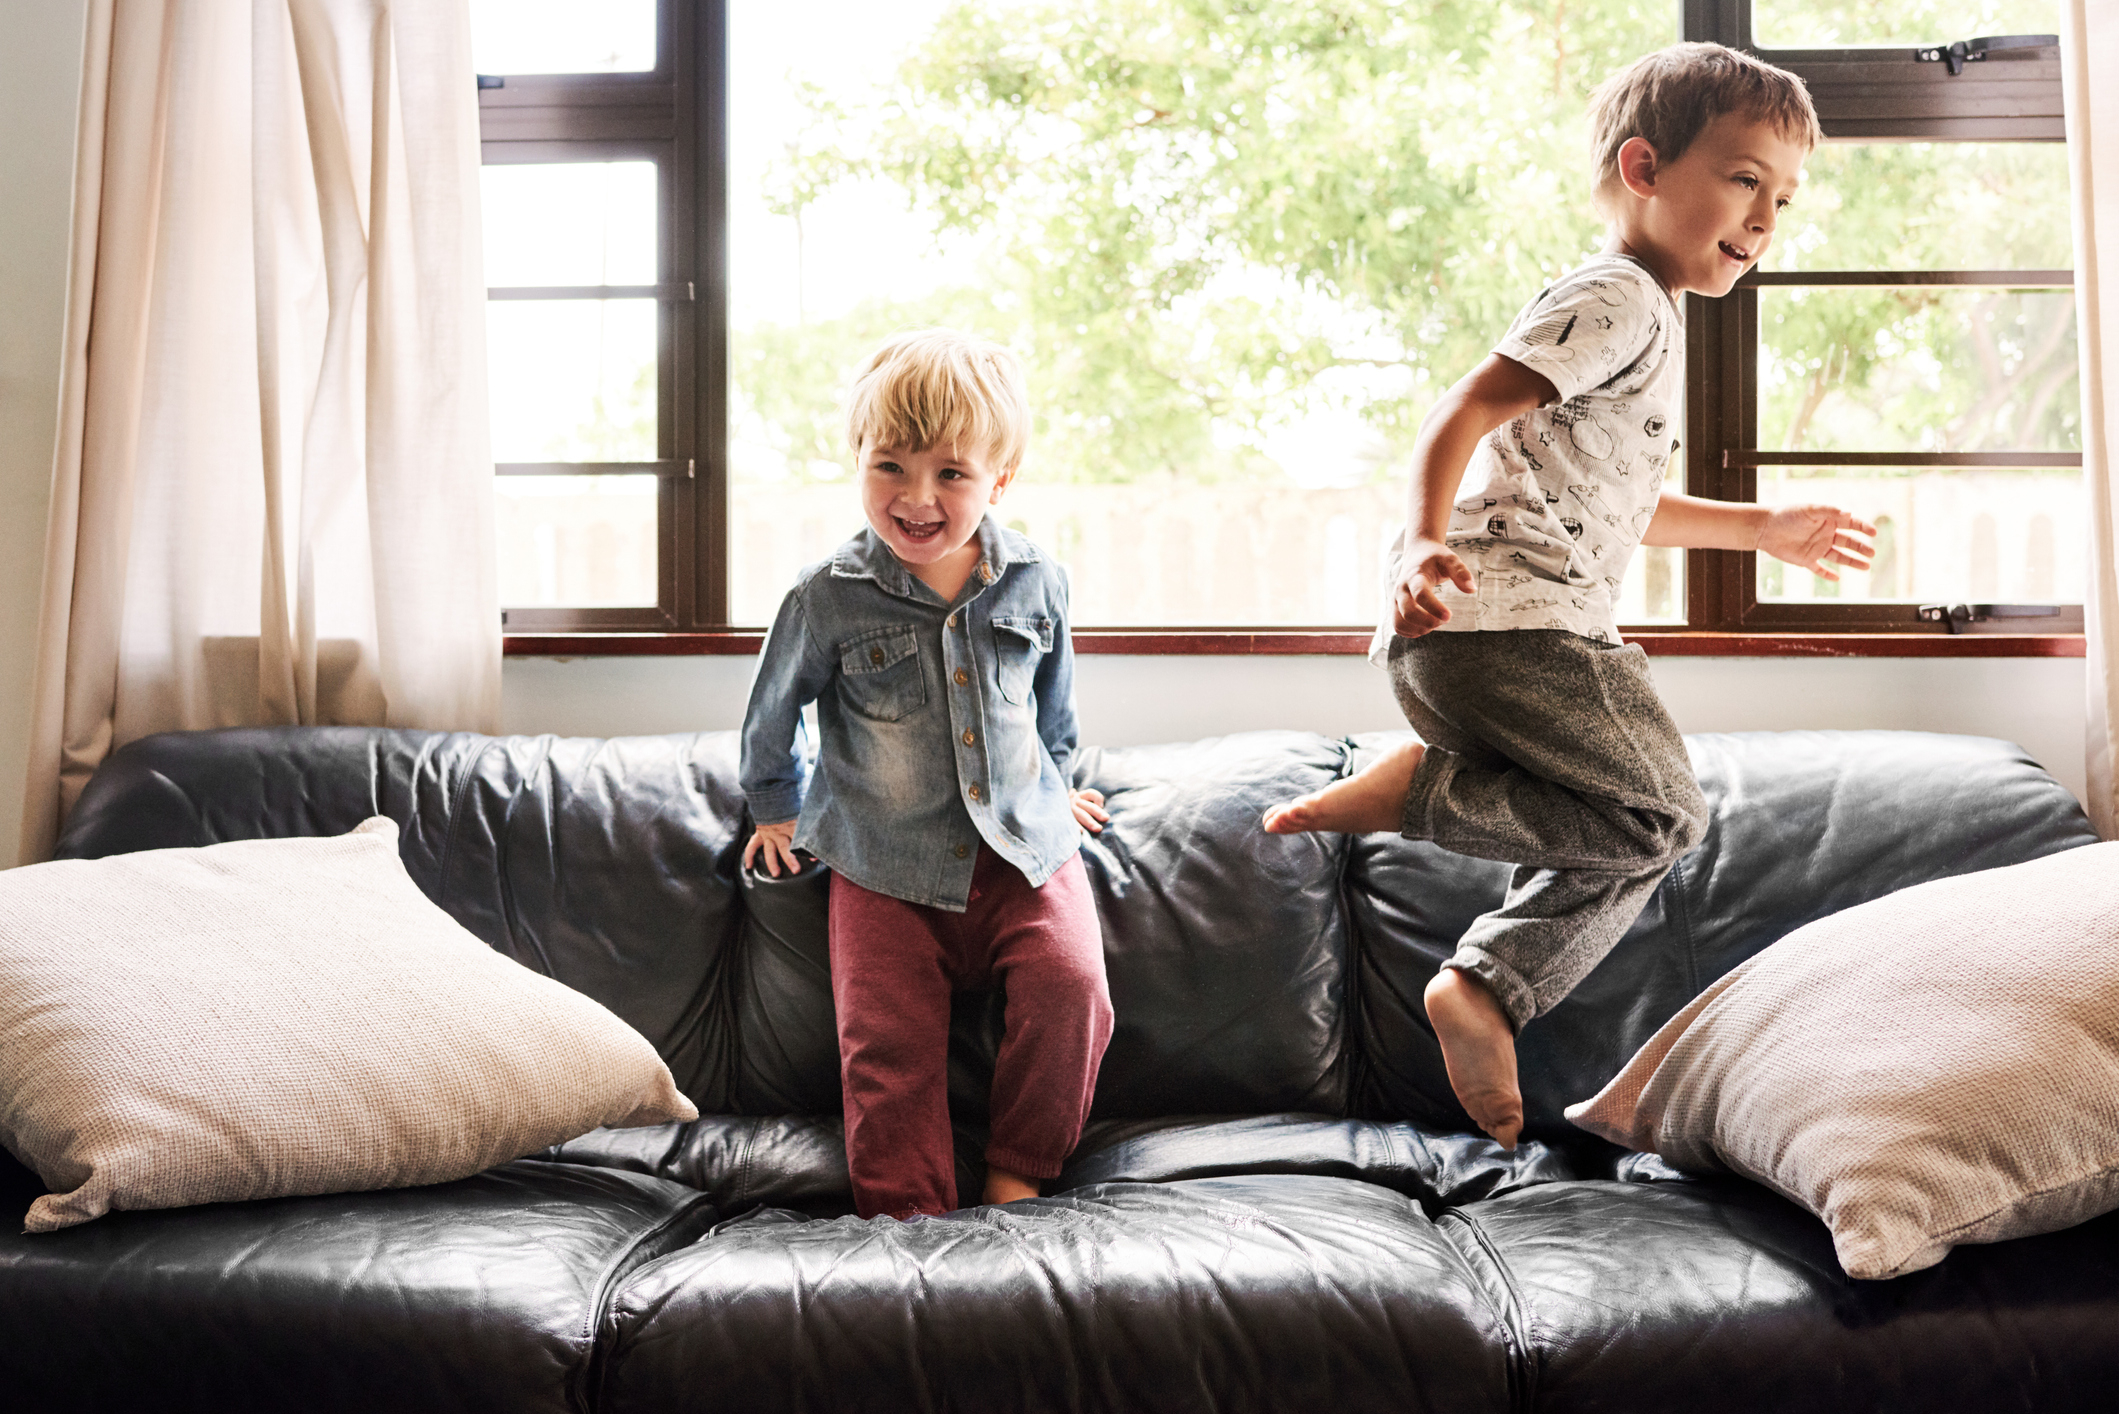 Two young boys are jumping on a couch